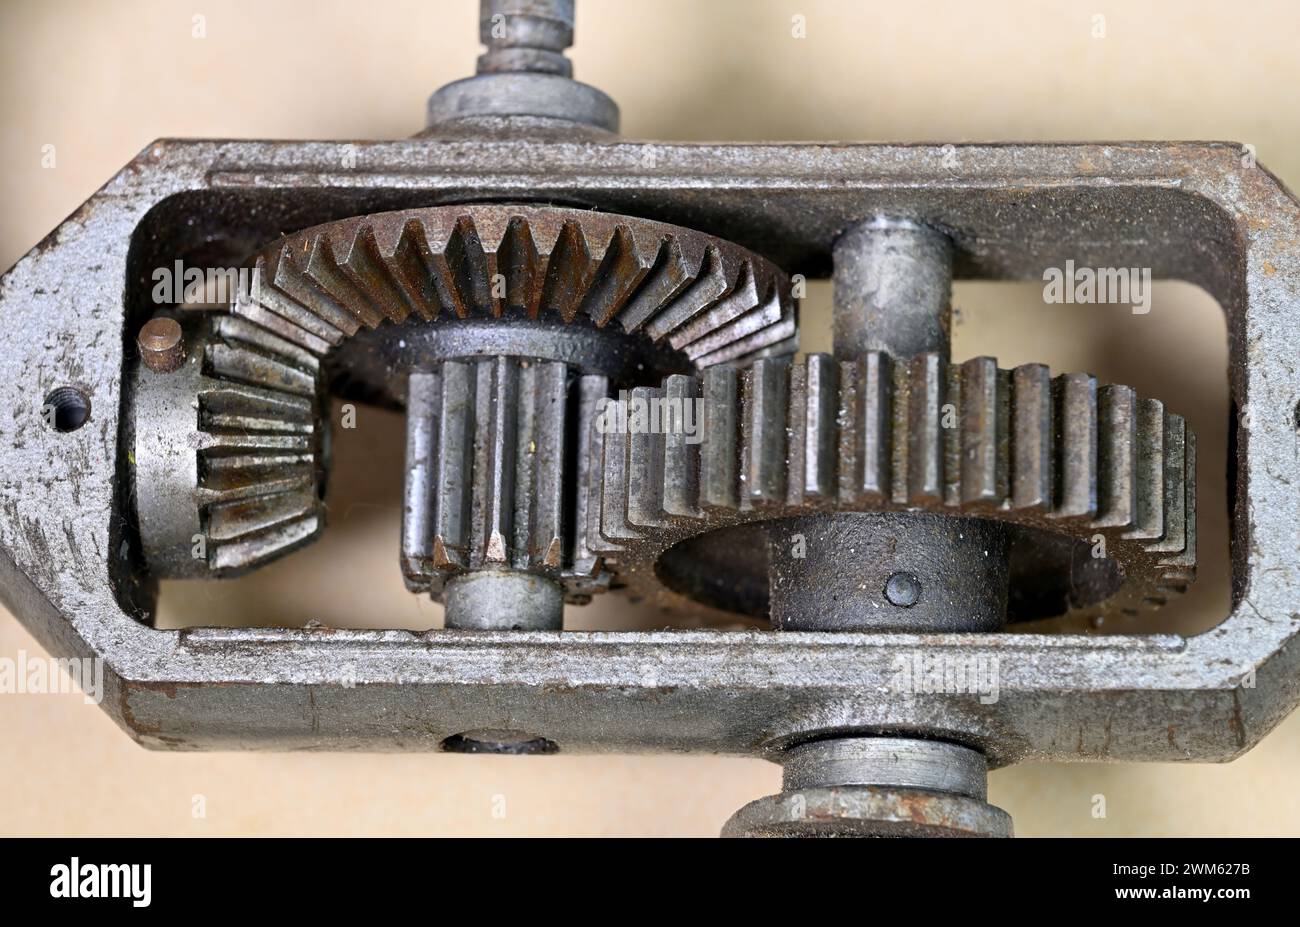 Gears and cogwheels to transmit power and change direction of rotation Stock Photo